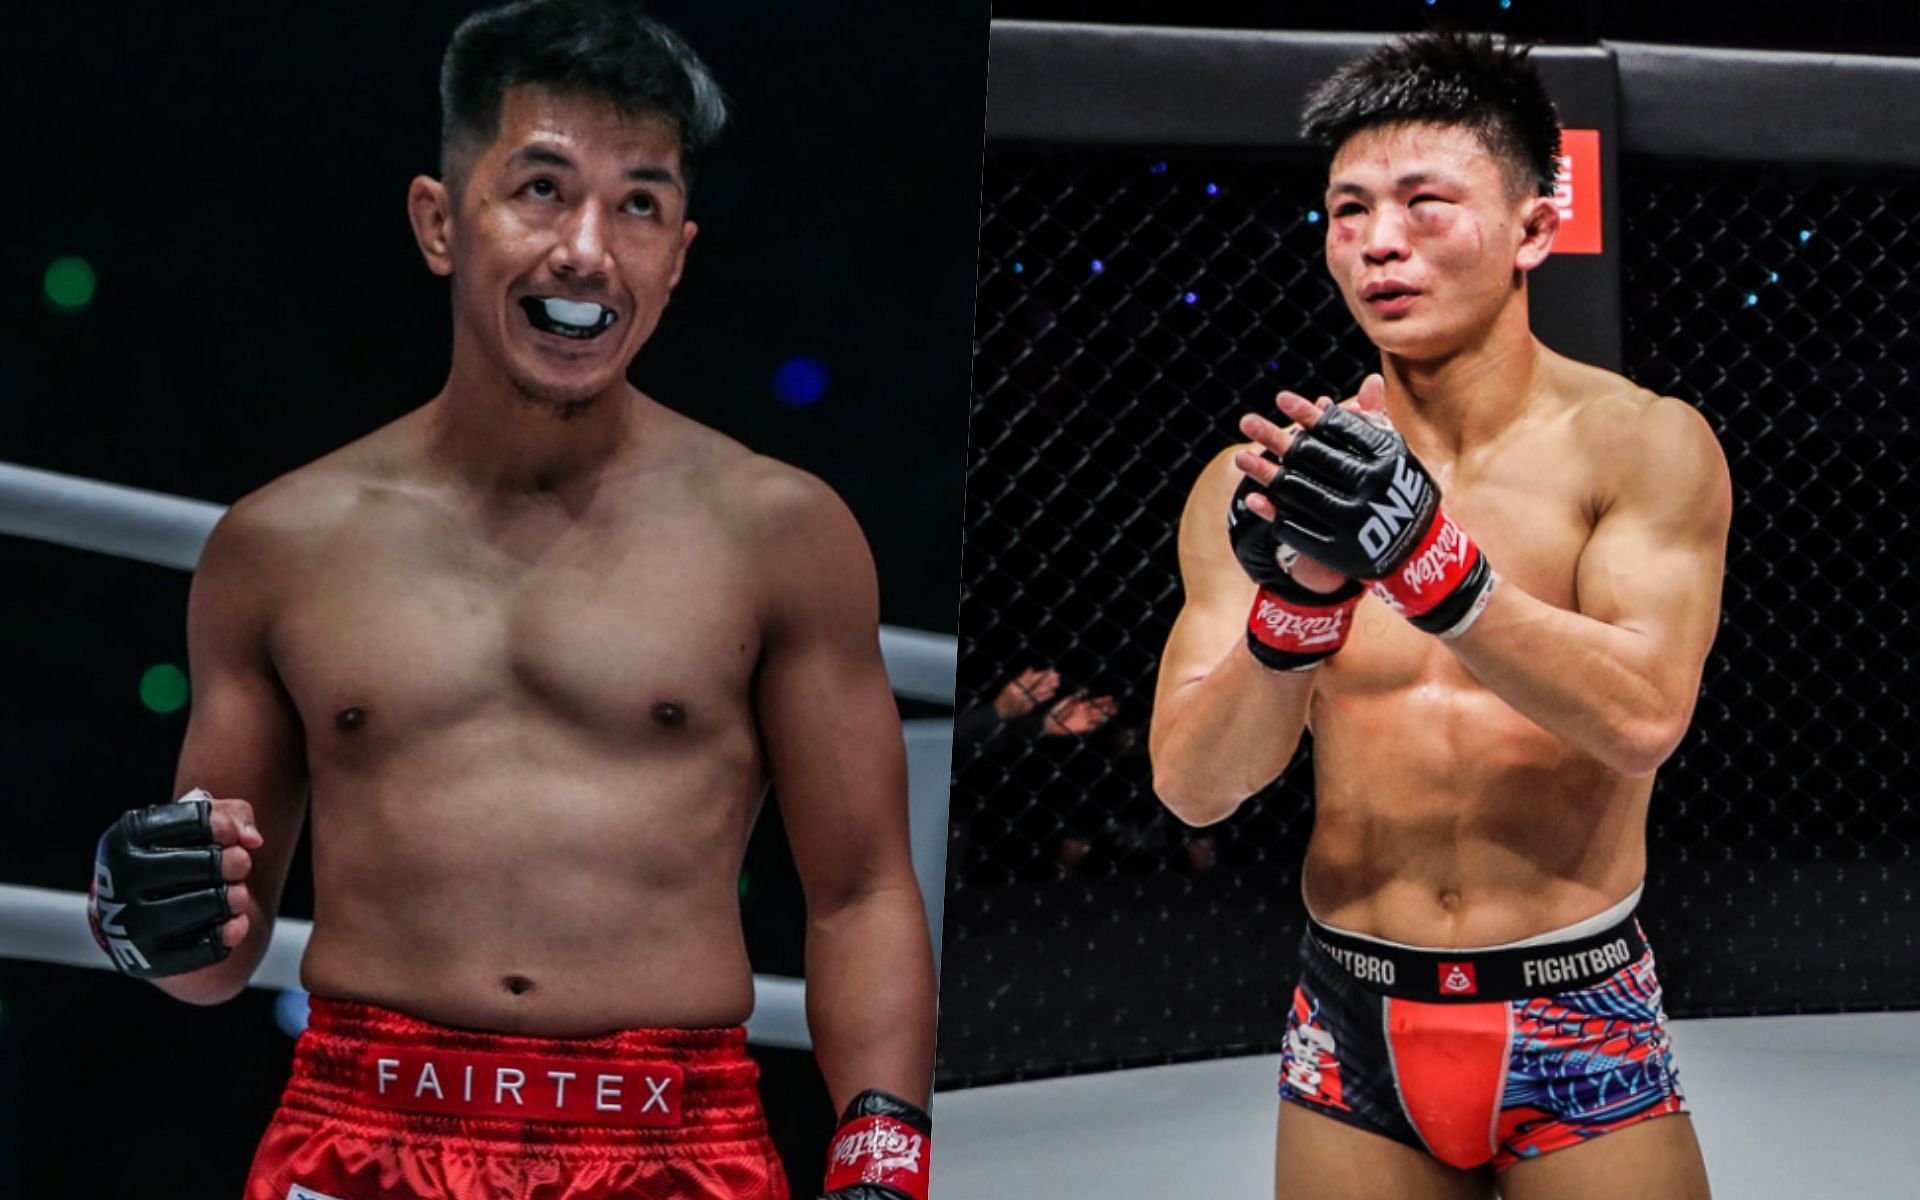 Geje Eustaquio (L) makes his return at ONE 164 vs Hu Yong. (R). | Photo by ONE Championship